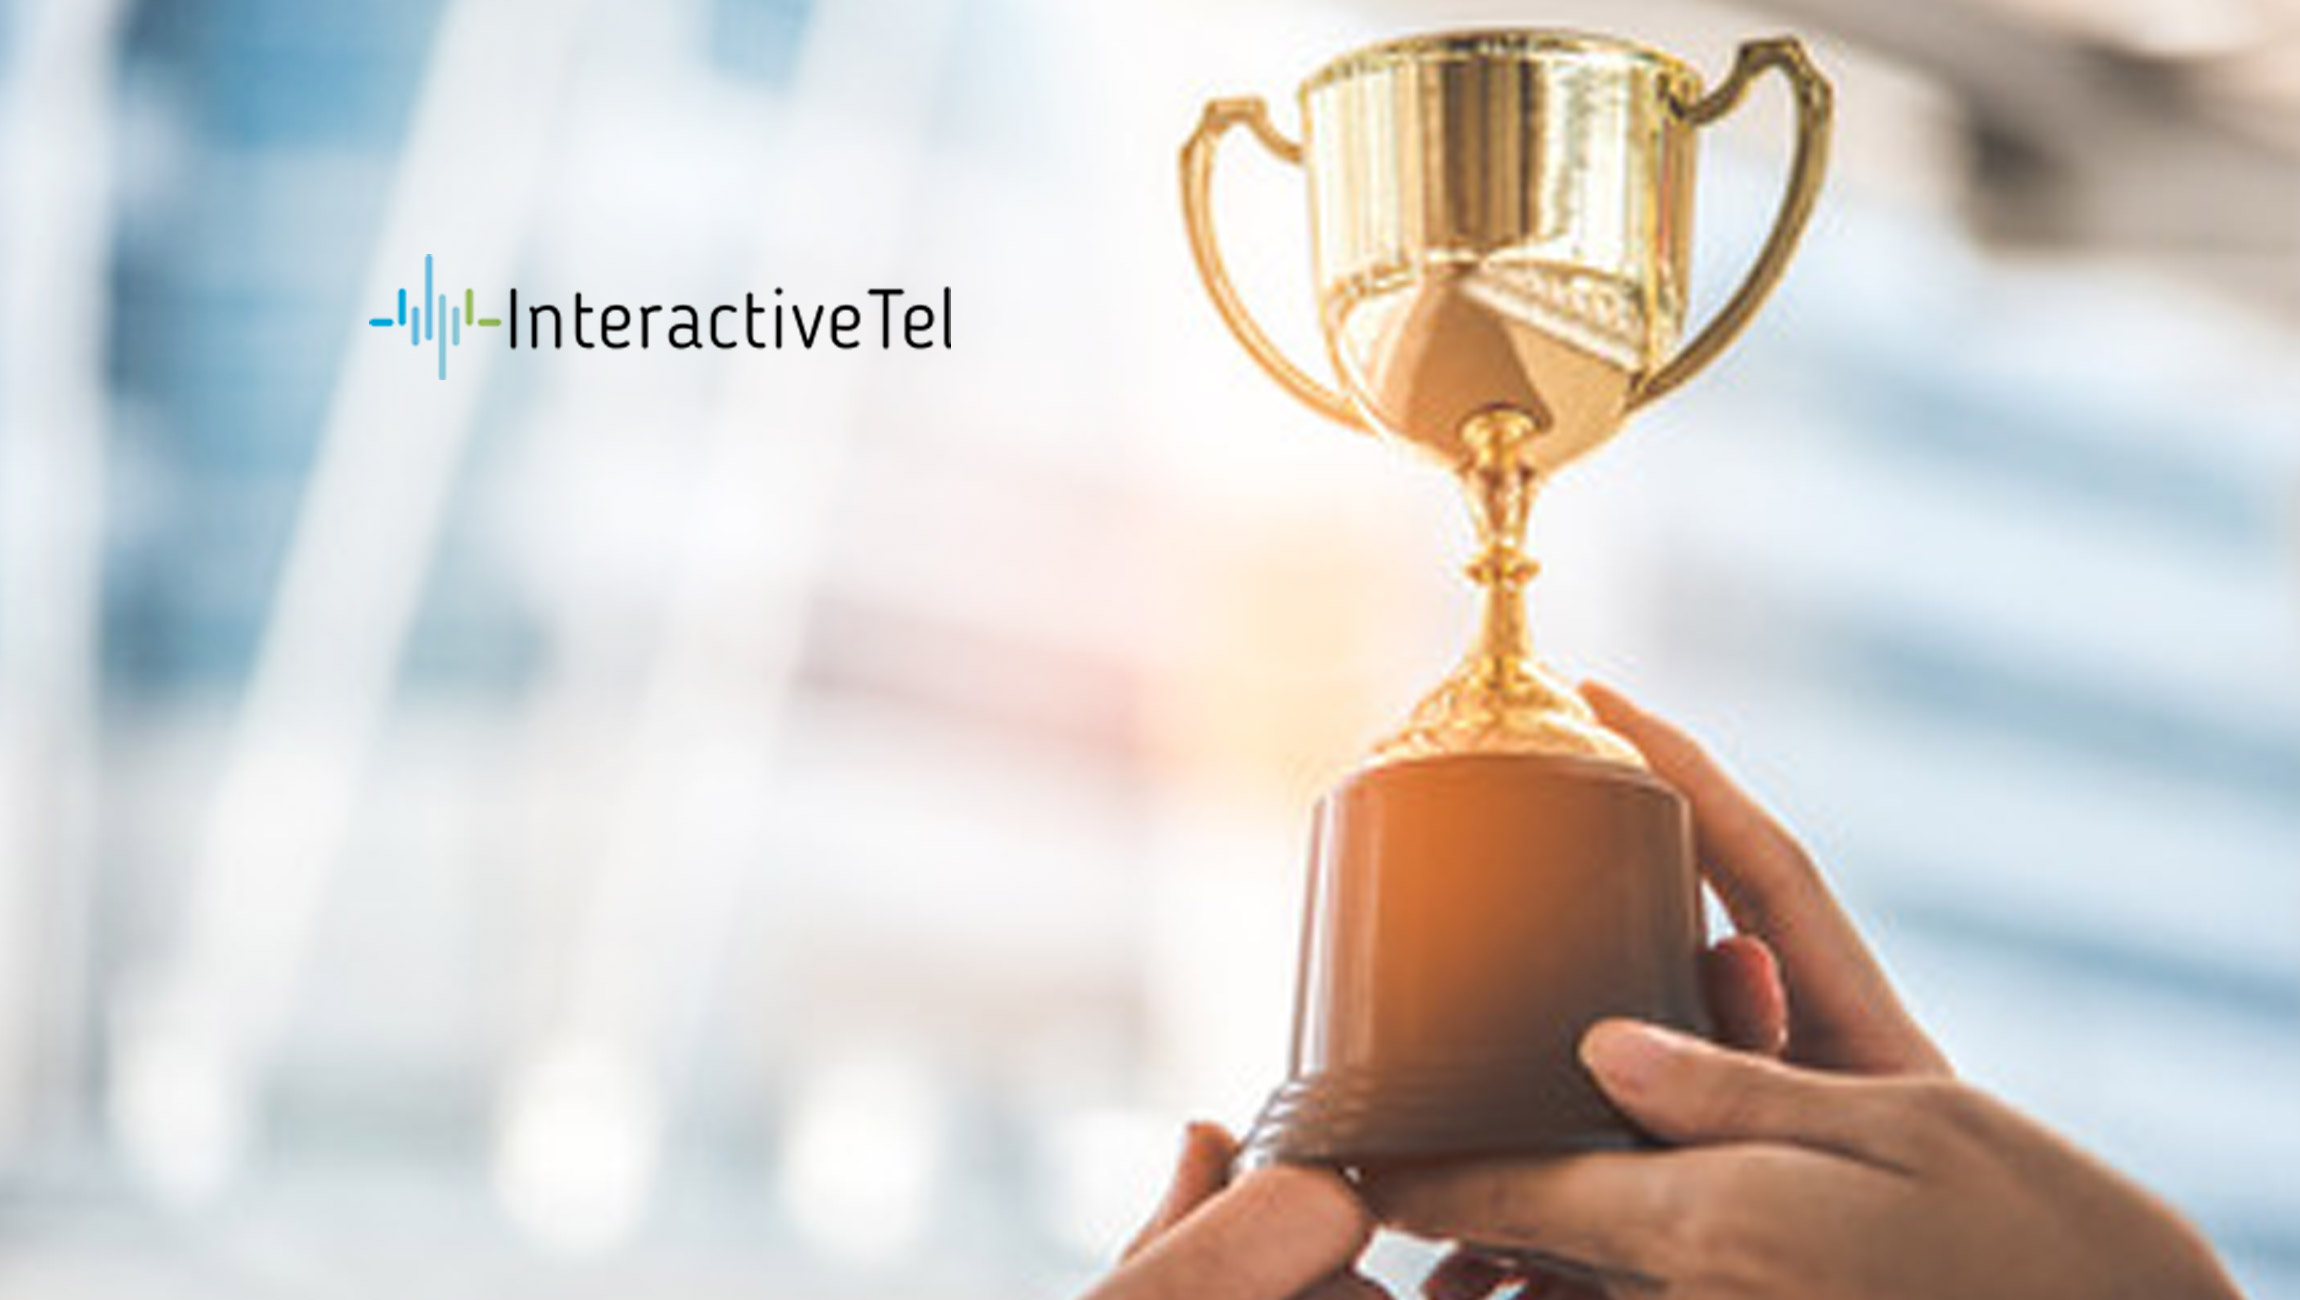 InteractiveTel Awarded 2022 Unified Communications Excellence Award from INTERNET TELEPHONY Magazine